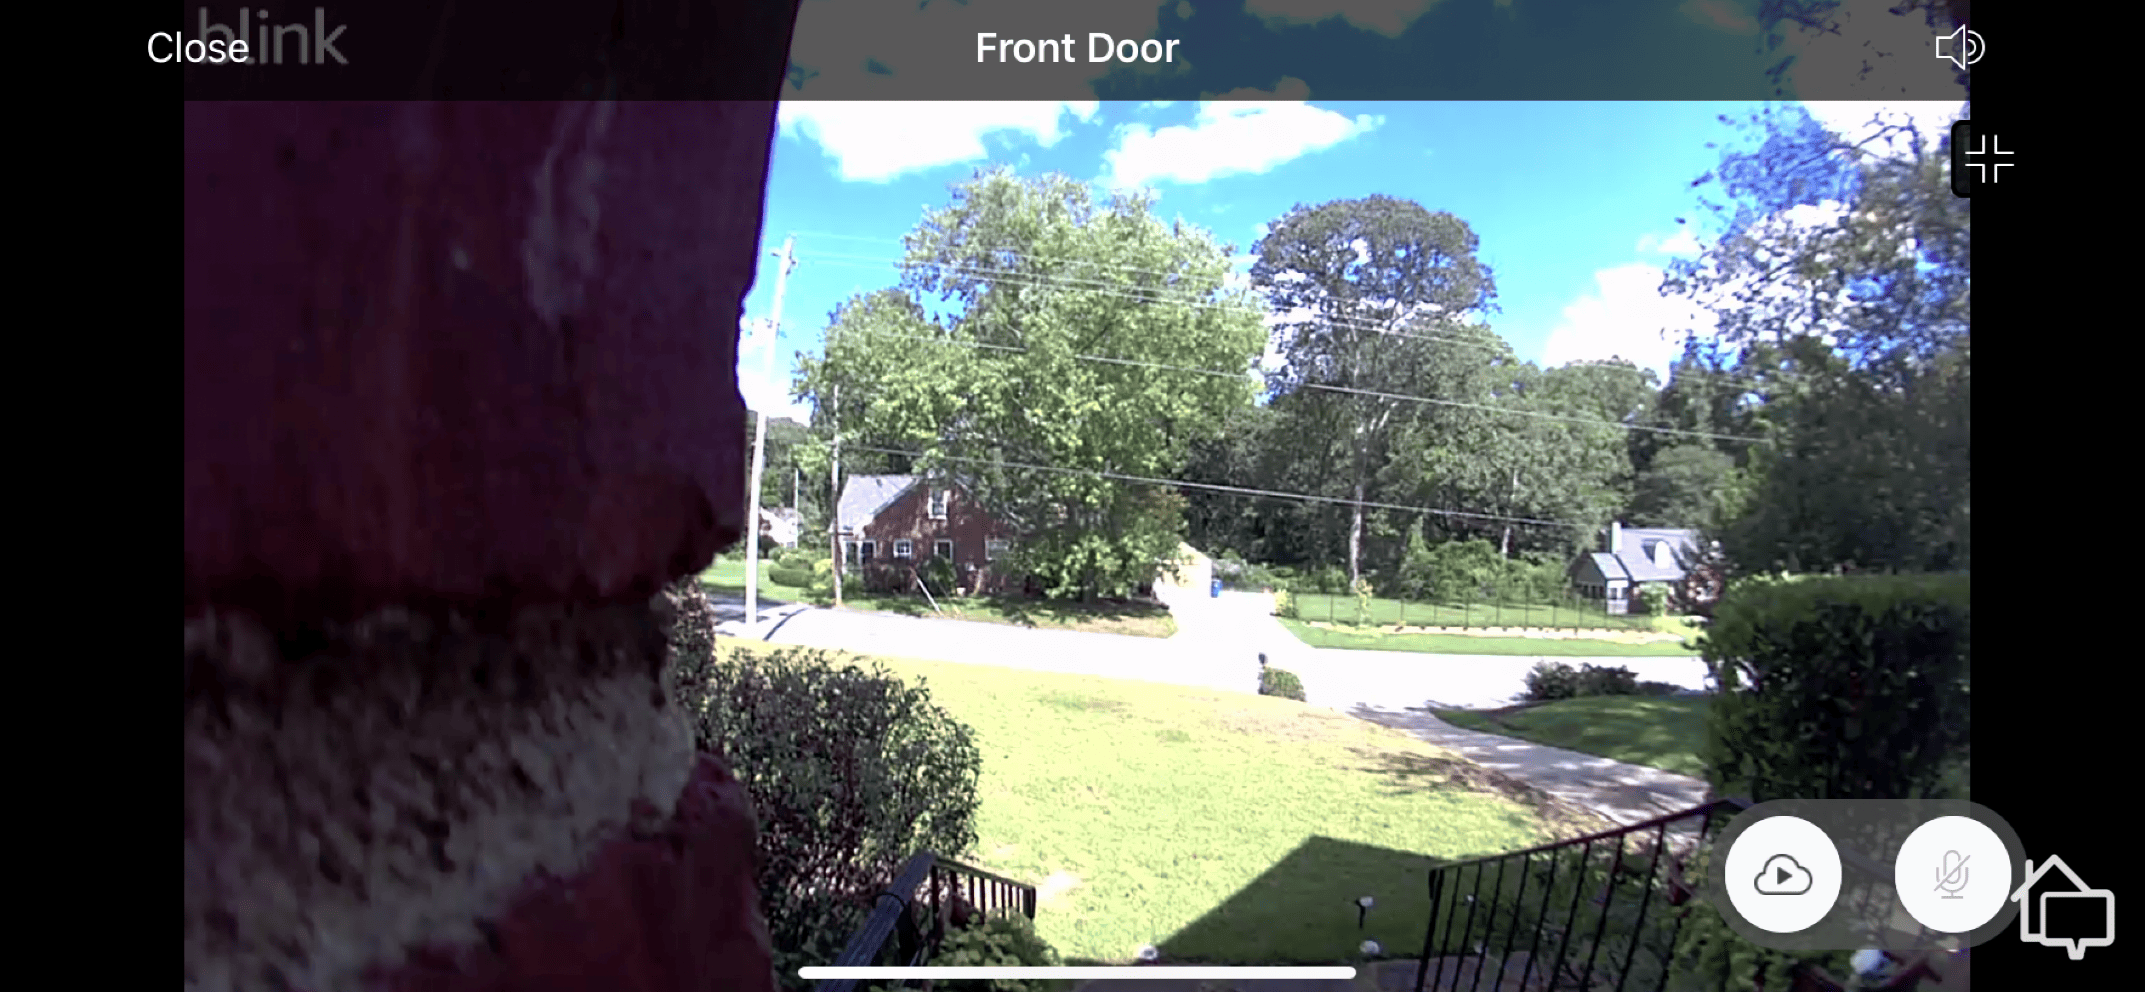 It’s a little difficult to see underneath the doorbell where packages usually end up.